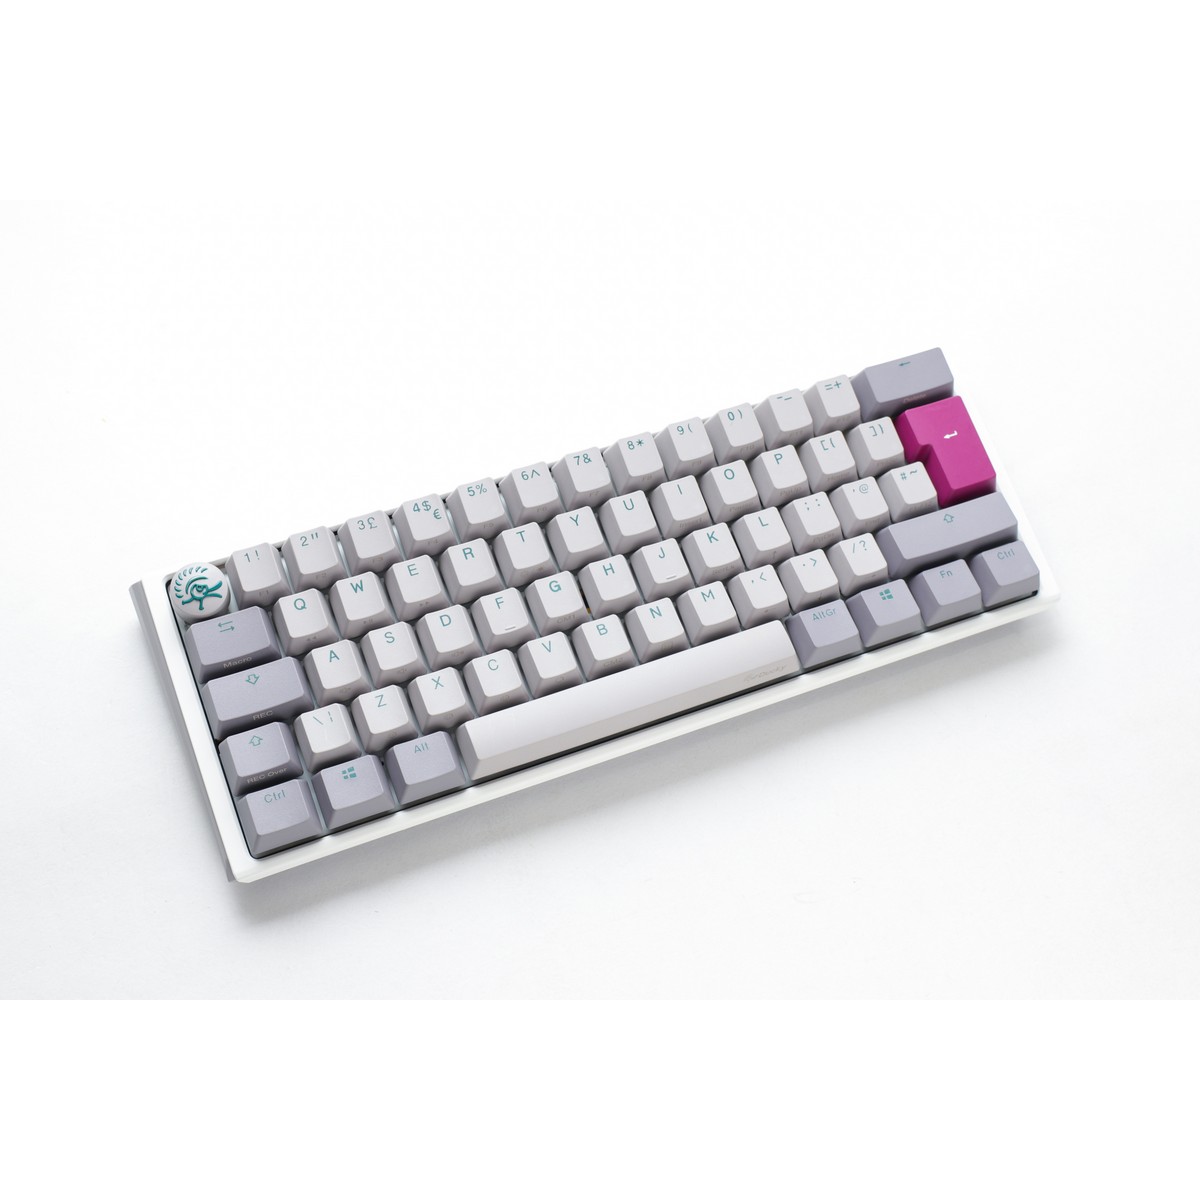 Ducky - Ducky One 3 Mist Mini 60% USB RGB Mechanical Gaming Keyboard Cherry MX Silent Red Switch - UK Layout